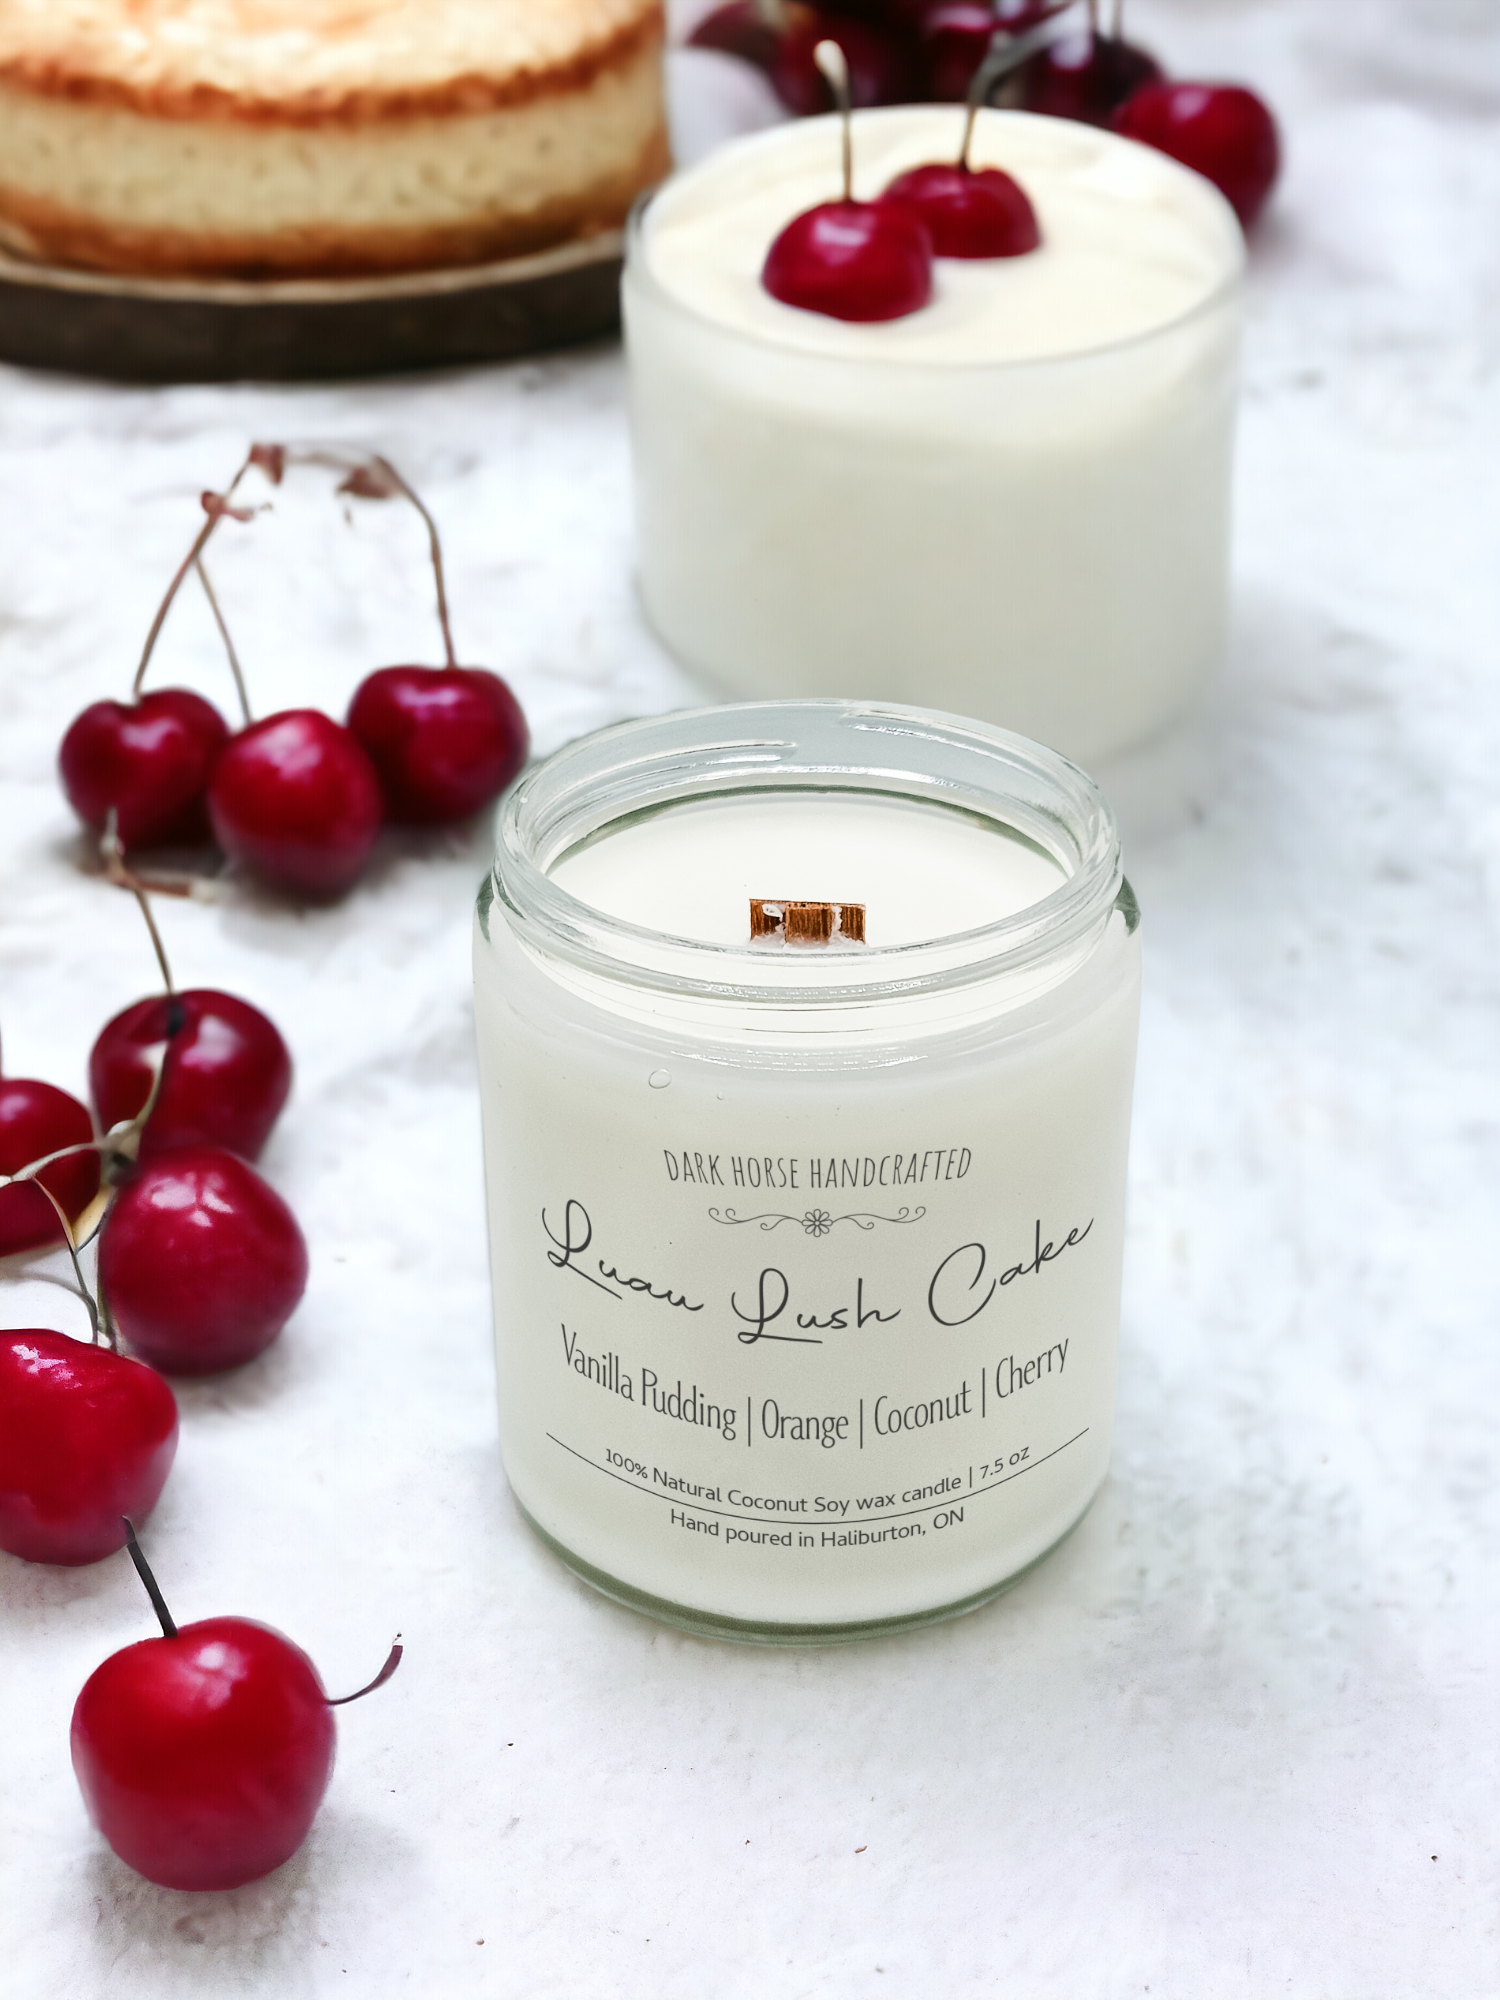 Luau Lush cake candle with cake and cherries in background - eco-friendly